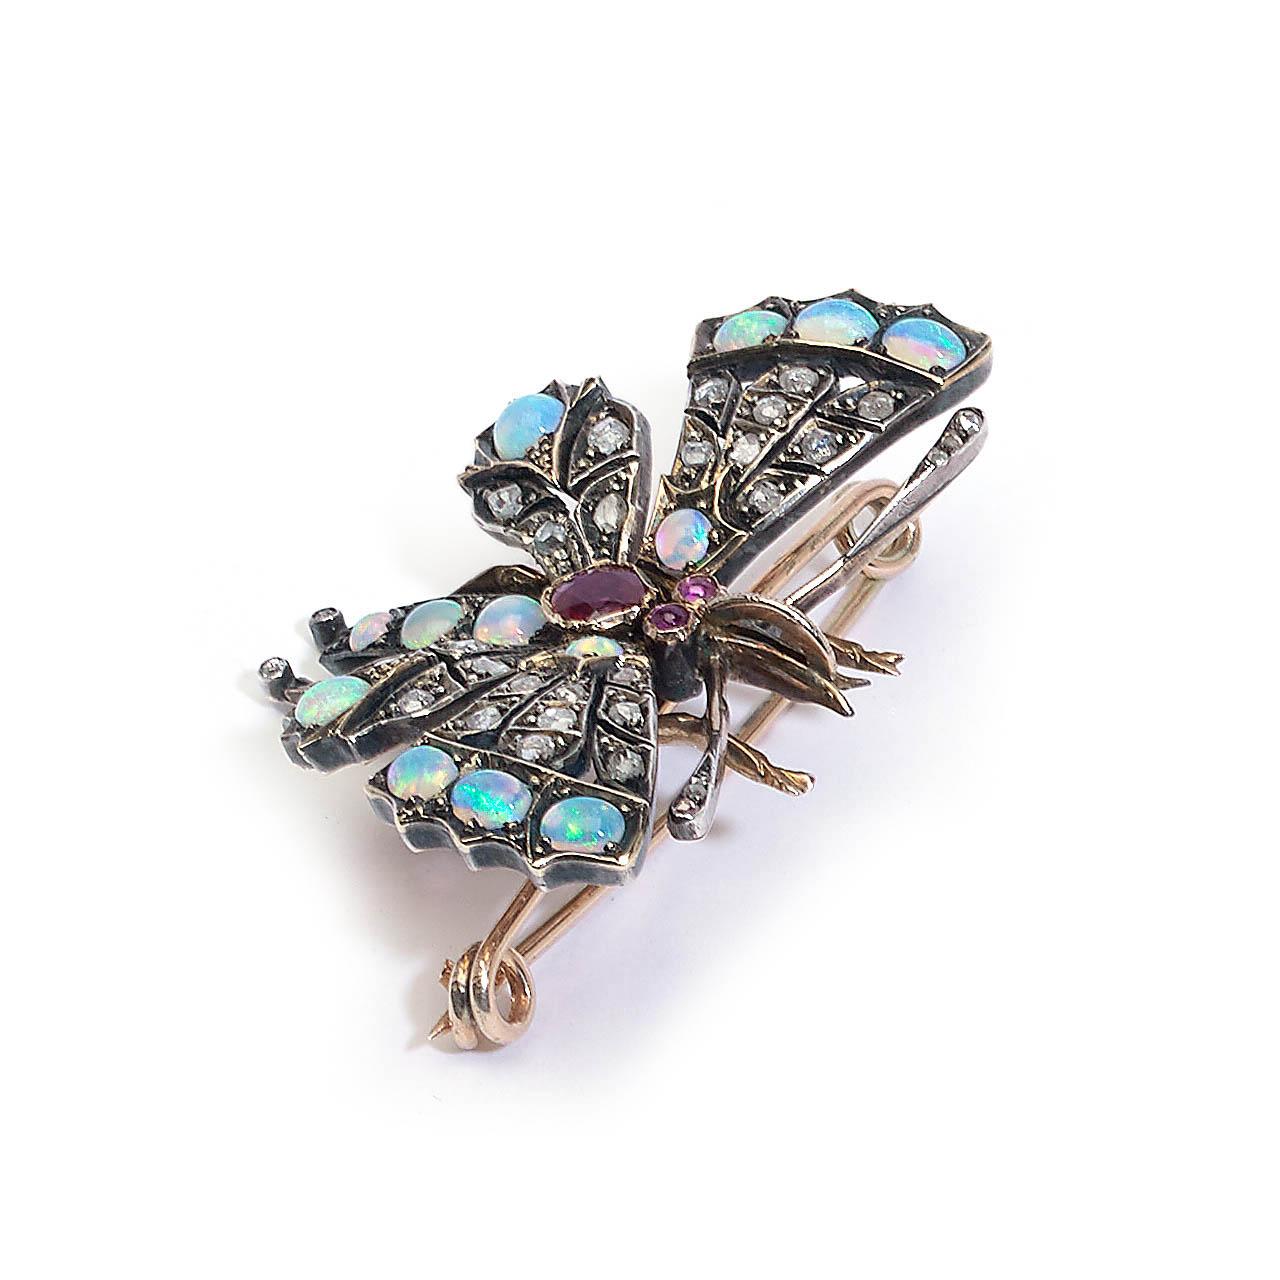 An antique opal, ruby and diamond butterfly brooch, with opals set in the wings and abdomen, a faceted ruby set in the thorax, cabochon rubies set in the eyes and rose-cut diamonds set in the wings and antennae, with an approximate total diamond